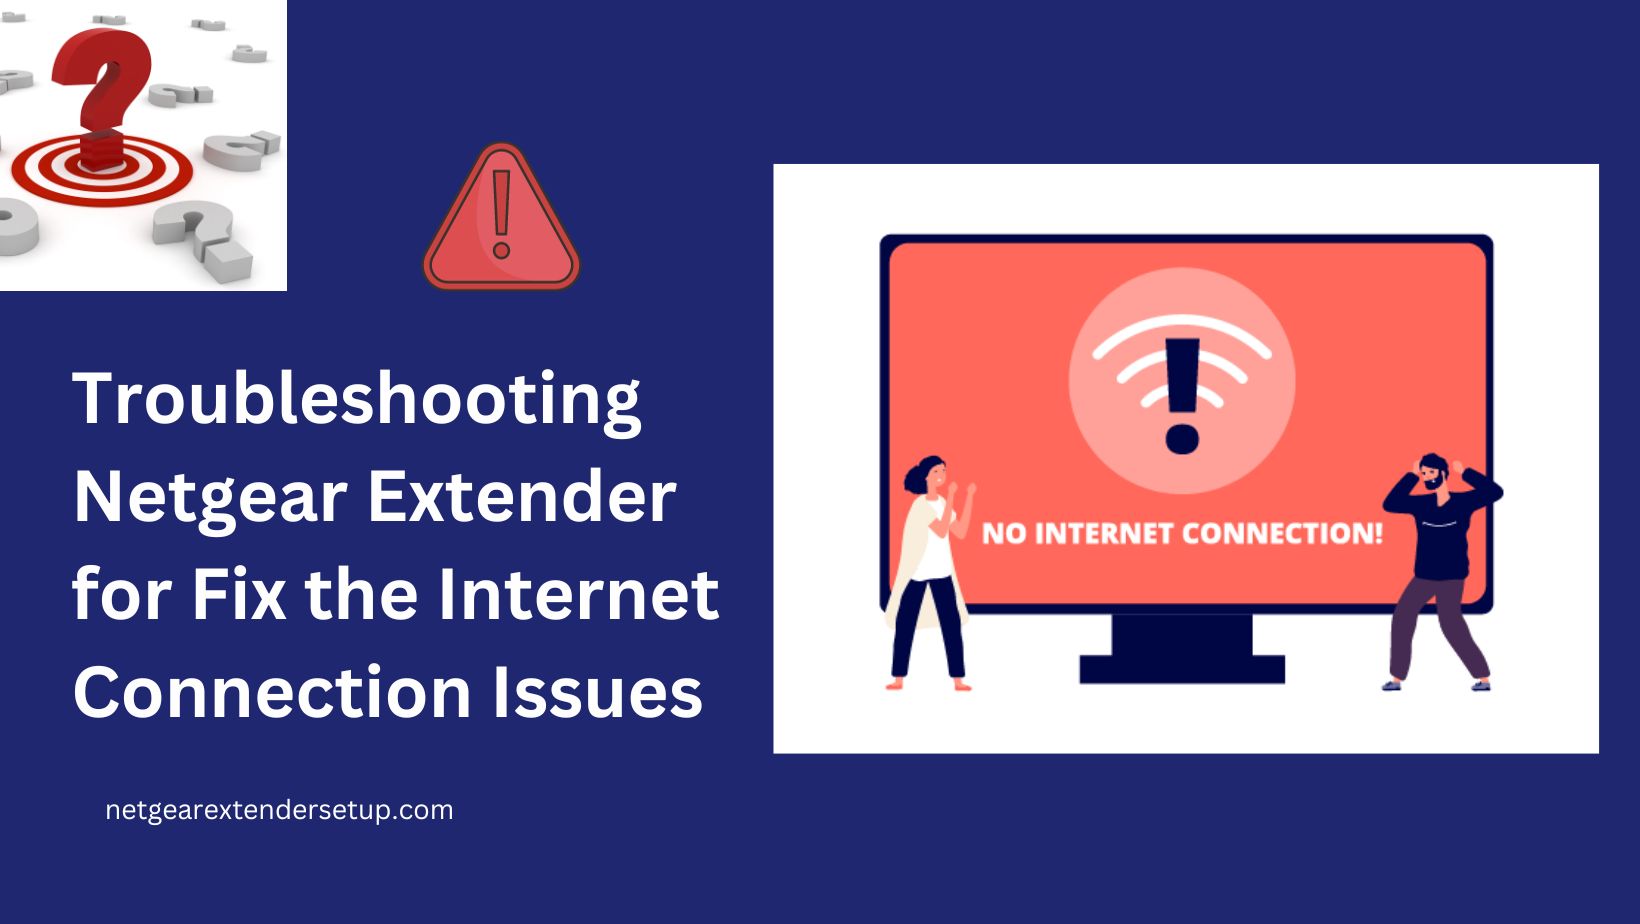 You are currently viewing Troubleshooting Netgear Extender for Fix the Internet Connection Issues